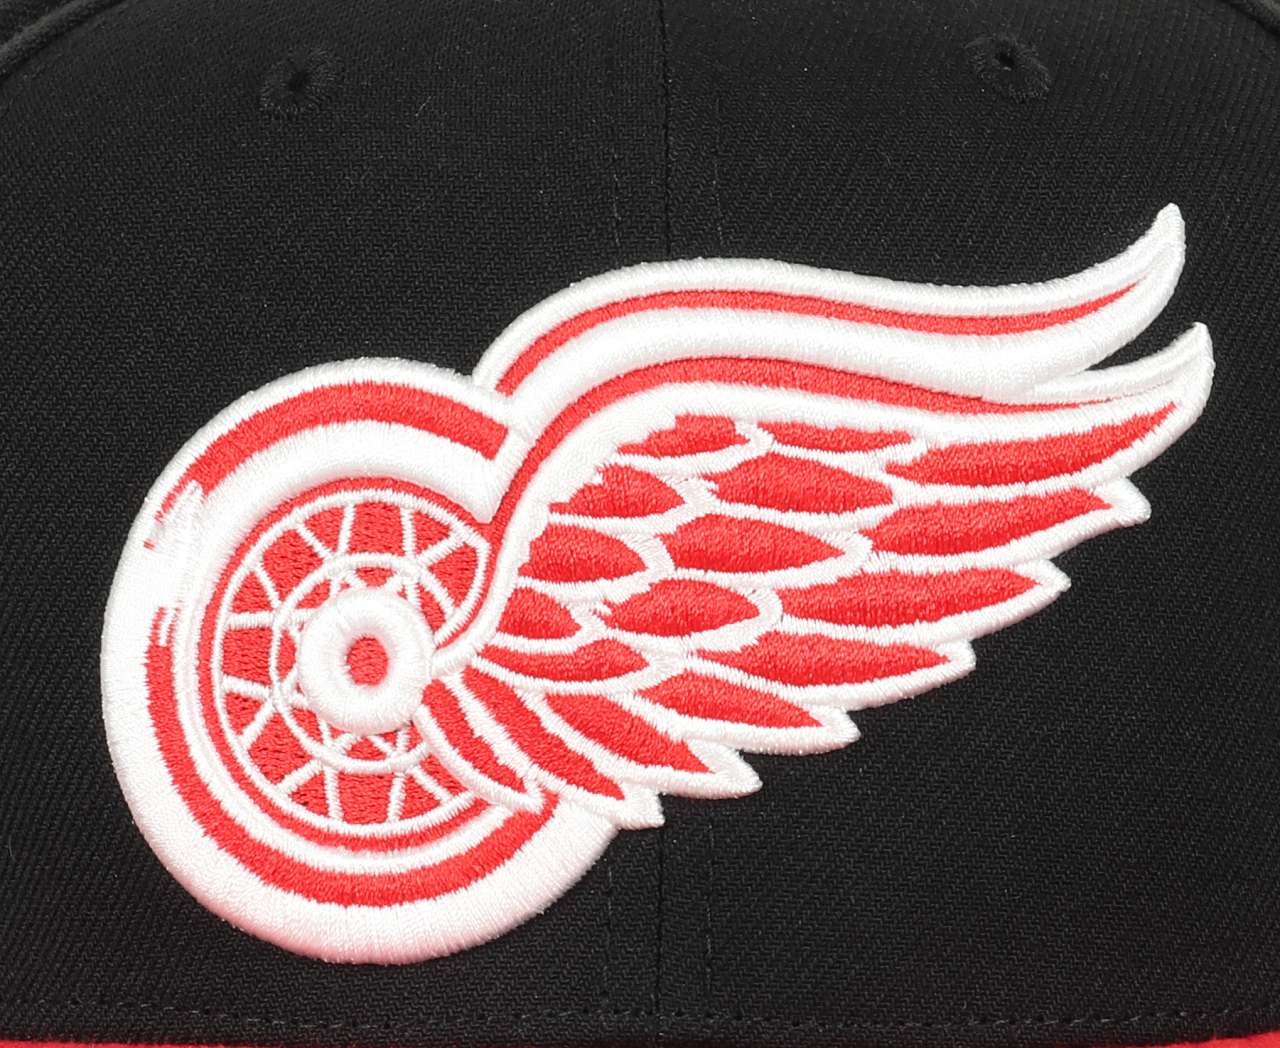 Detroit Red Wings NHL Team 2 Tone 2.0 Black Red Original Fit Snapback Cap Mitchell & Ness